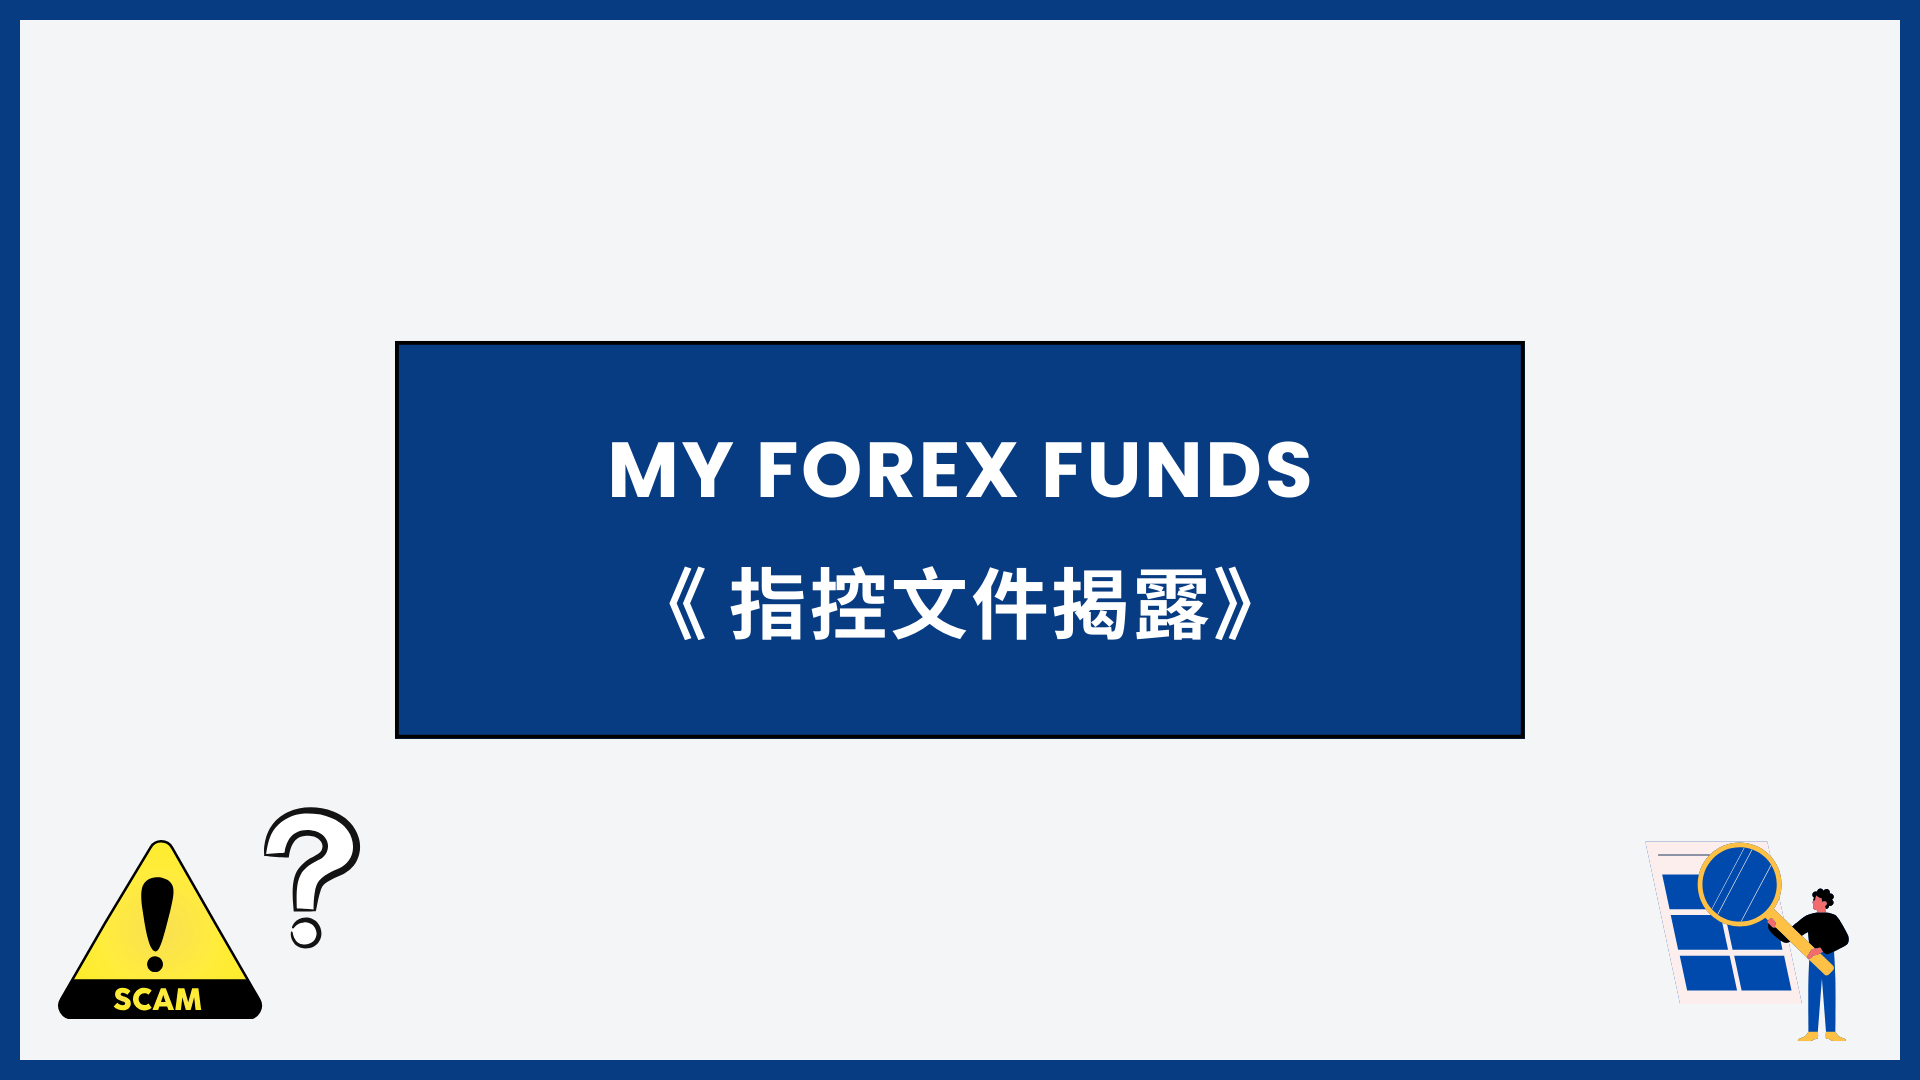 My Forex Funds 詐騙